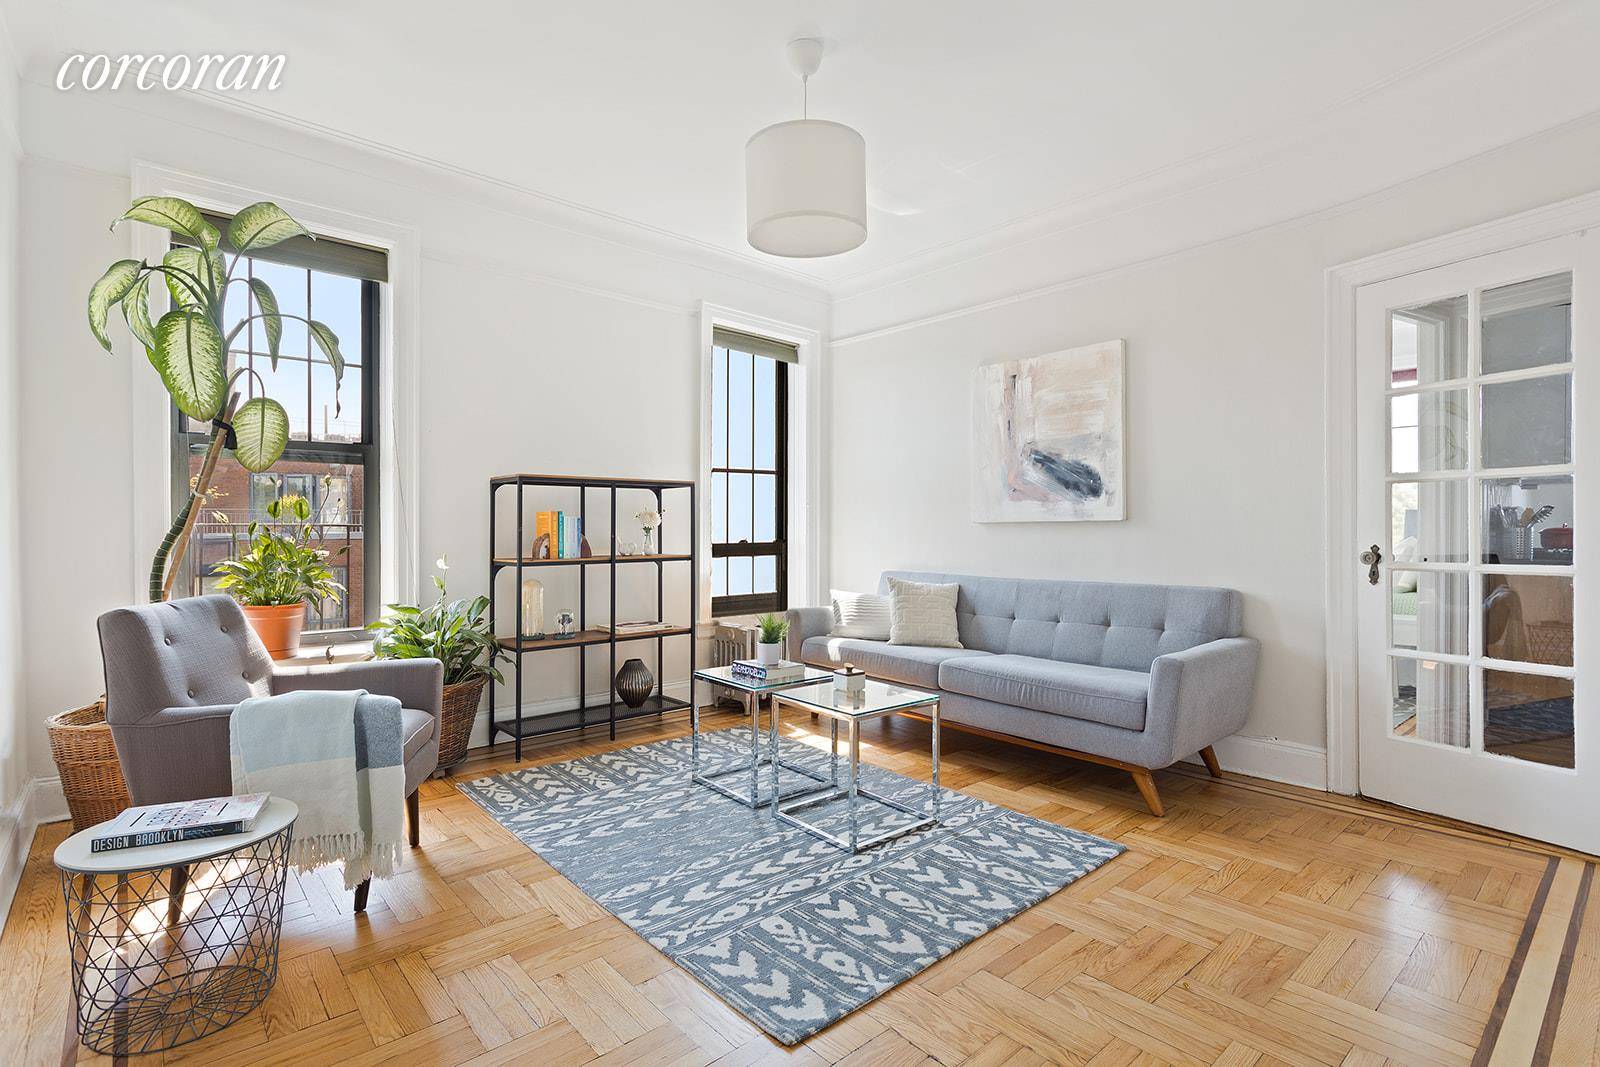 Welcome home to this bright and airy 1 bedroom coop with a spectacular private roof deck.